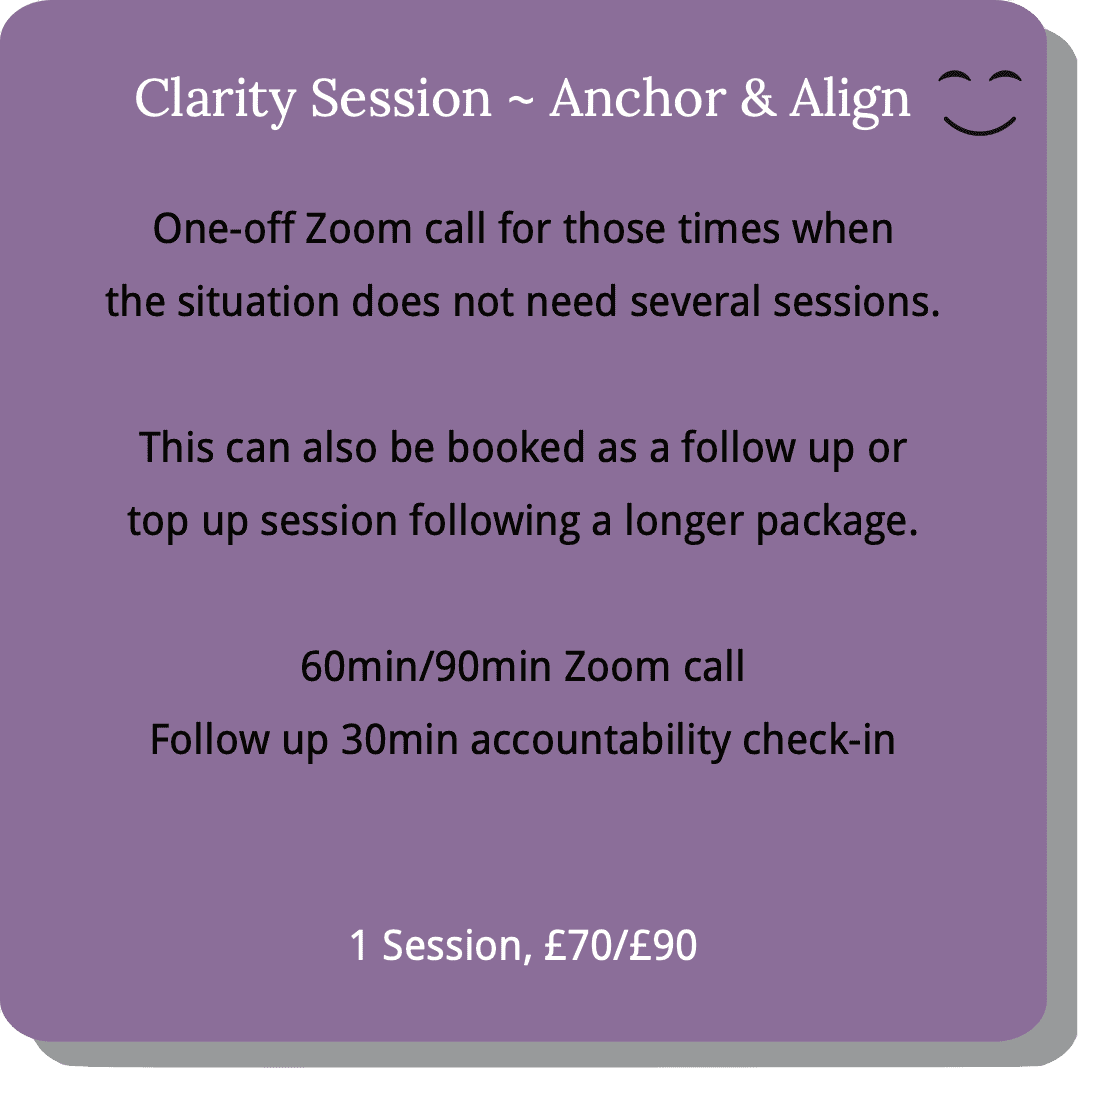 Clarity Session Package to anchor and align. One-off Zoom or Skype call for adults.